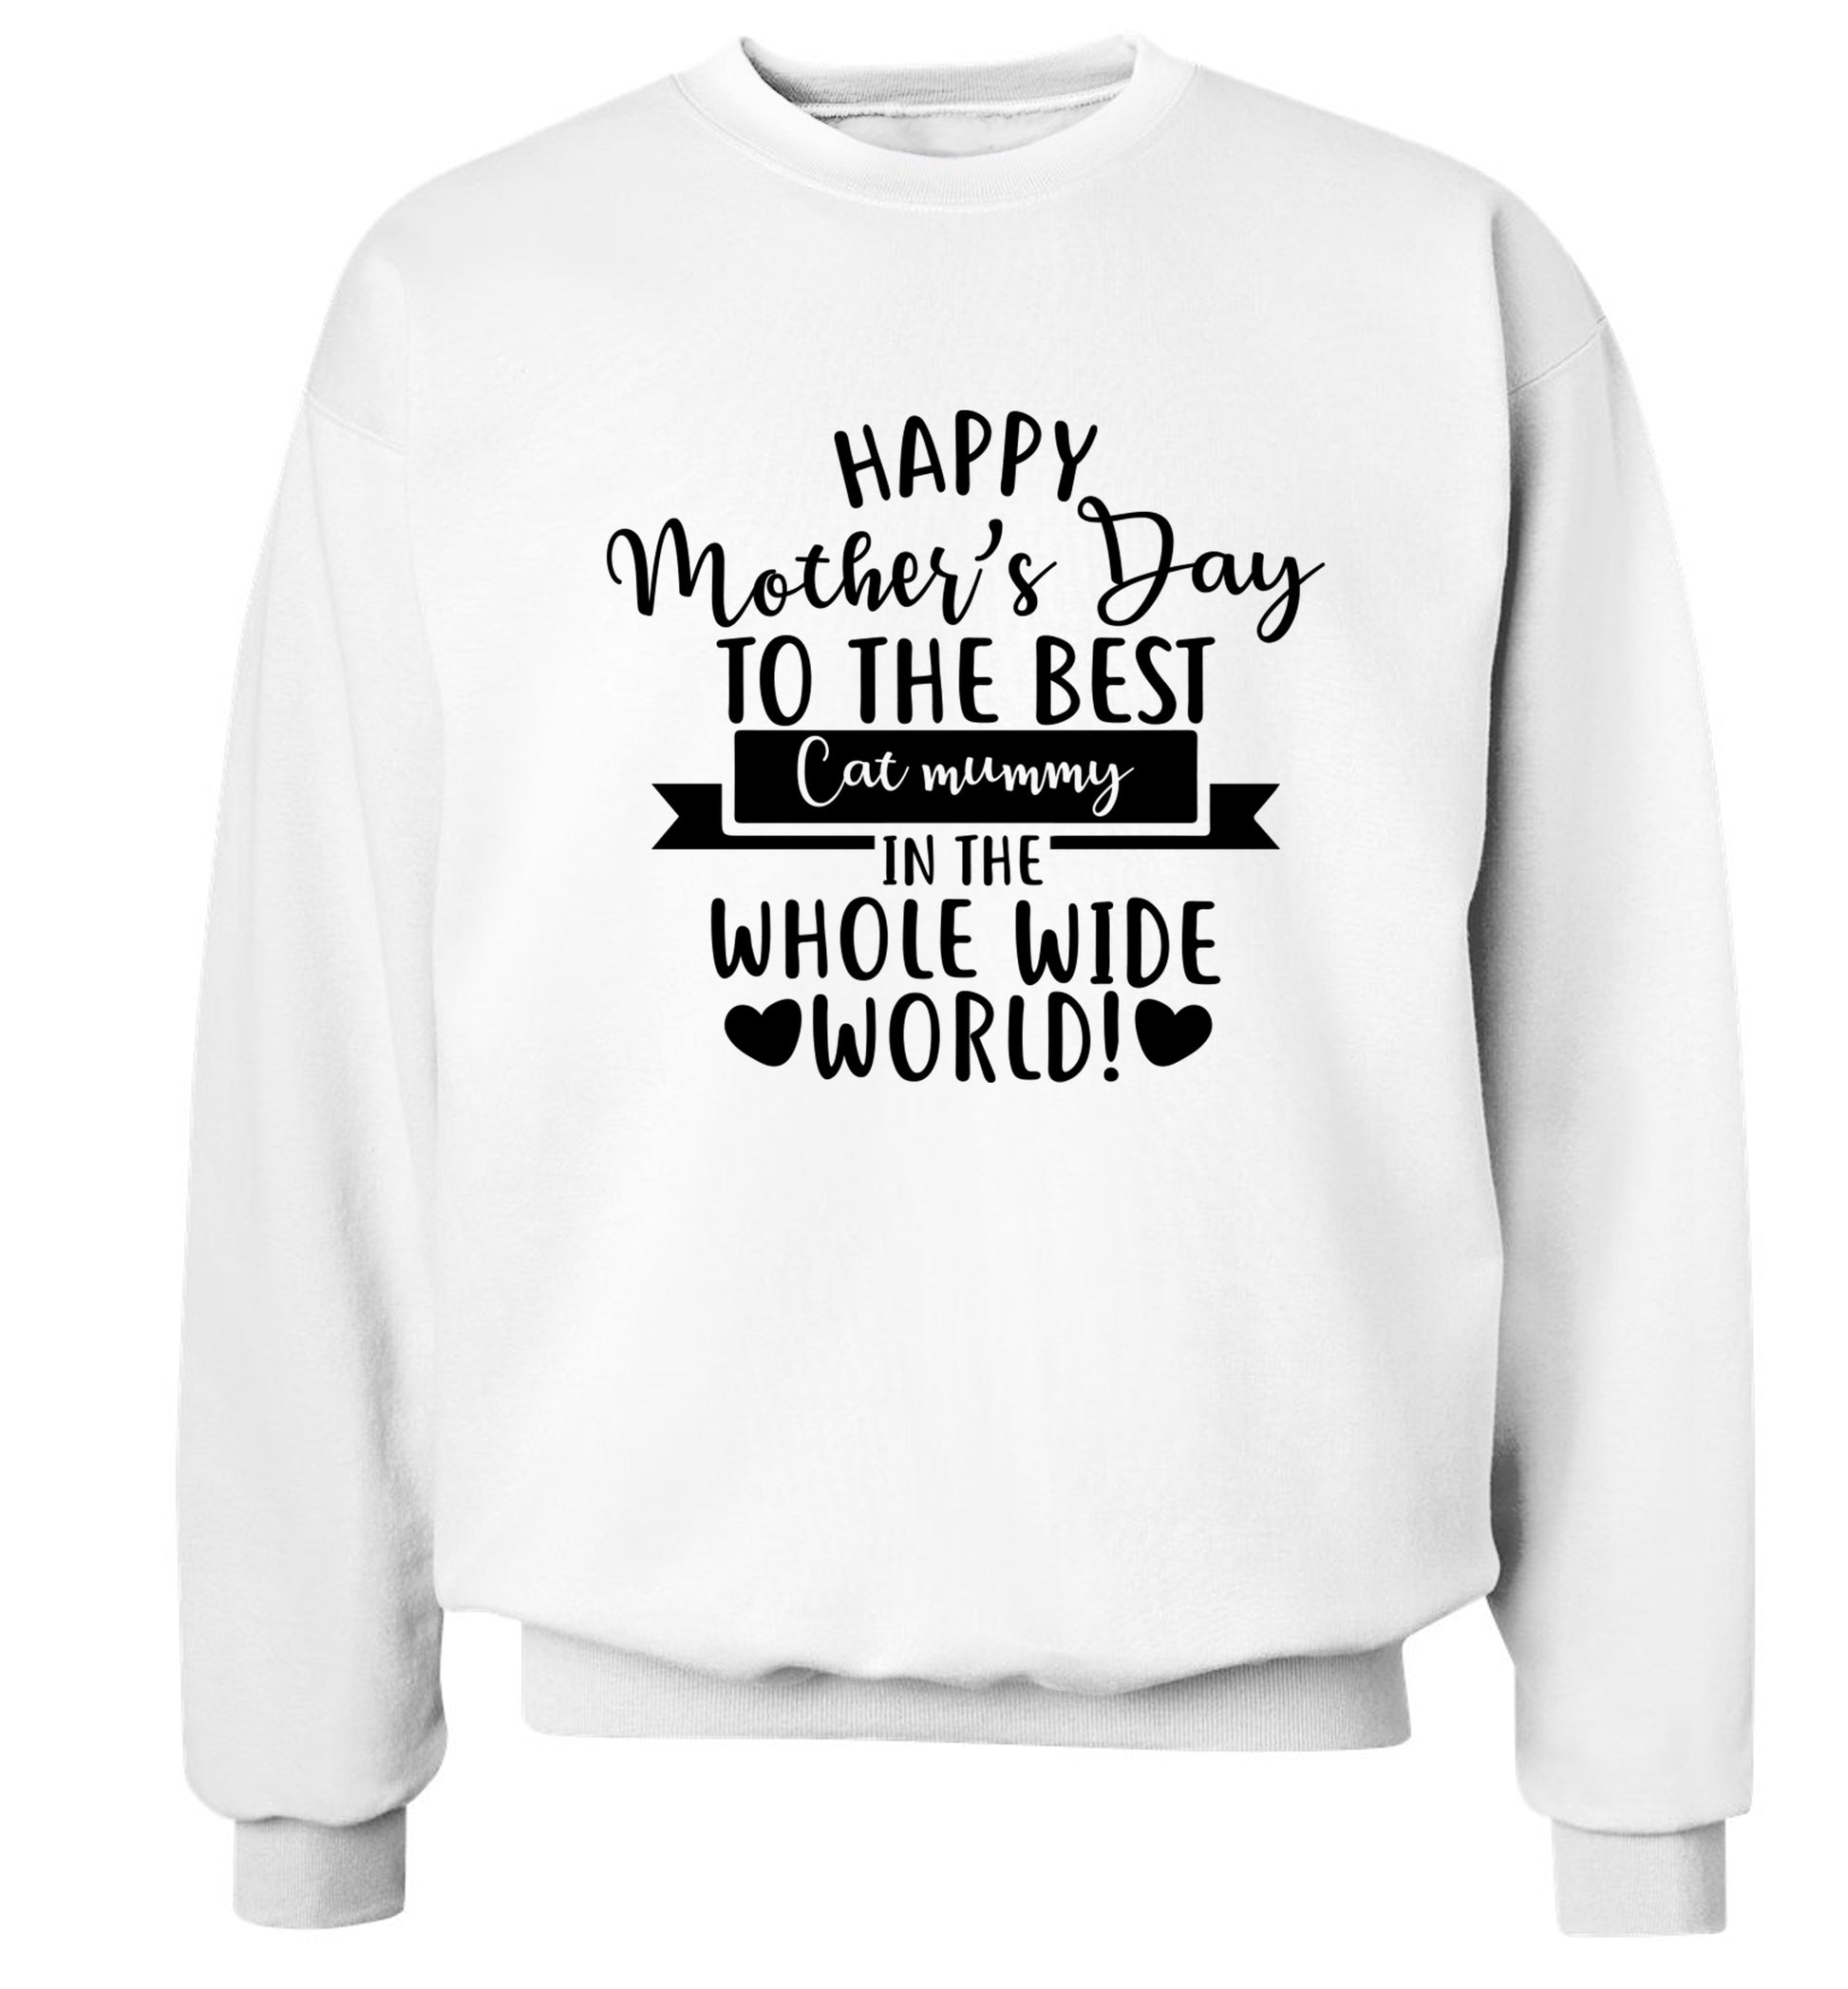 Happy mother's day to the best cat mummy in the world Adult's unisex white Sweater 2XL